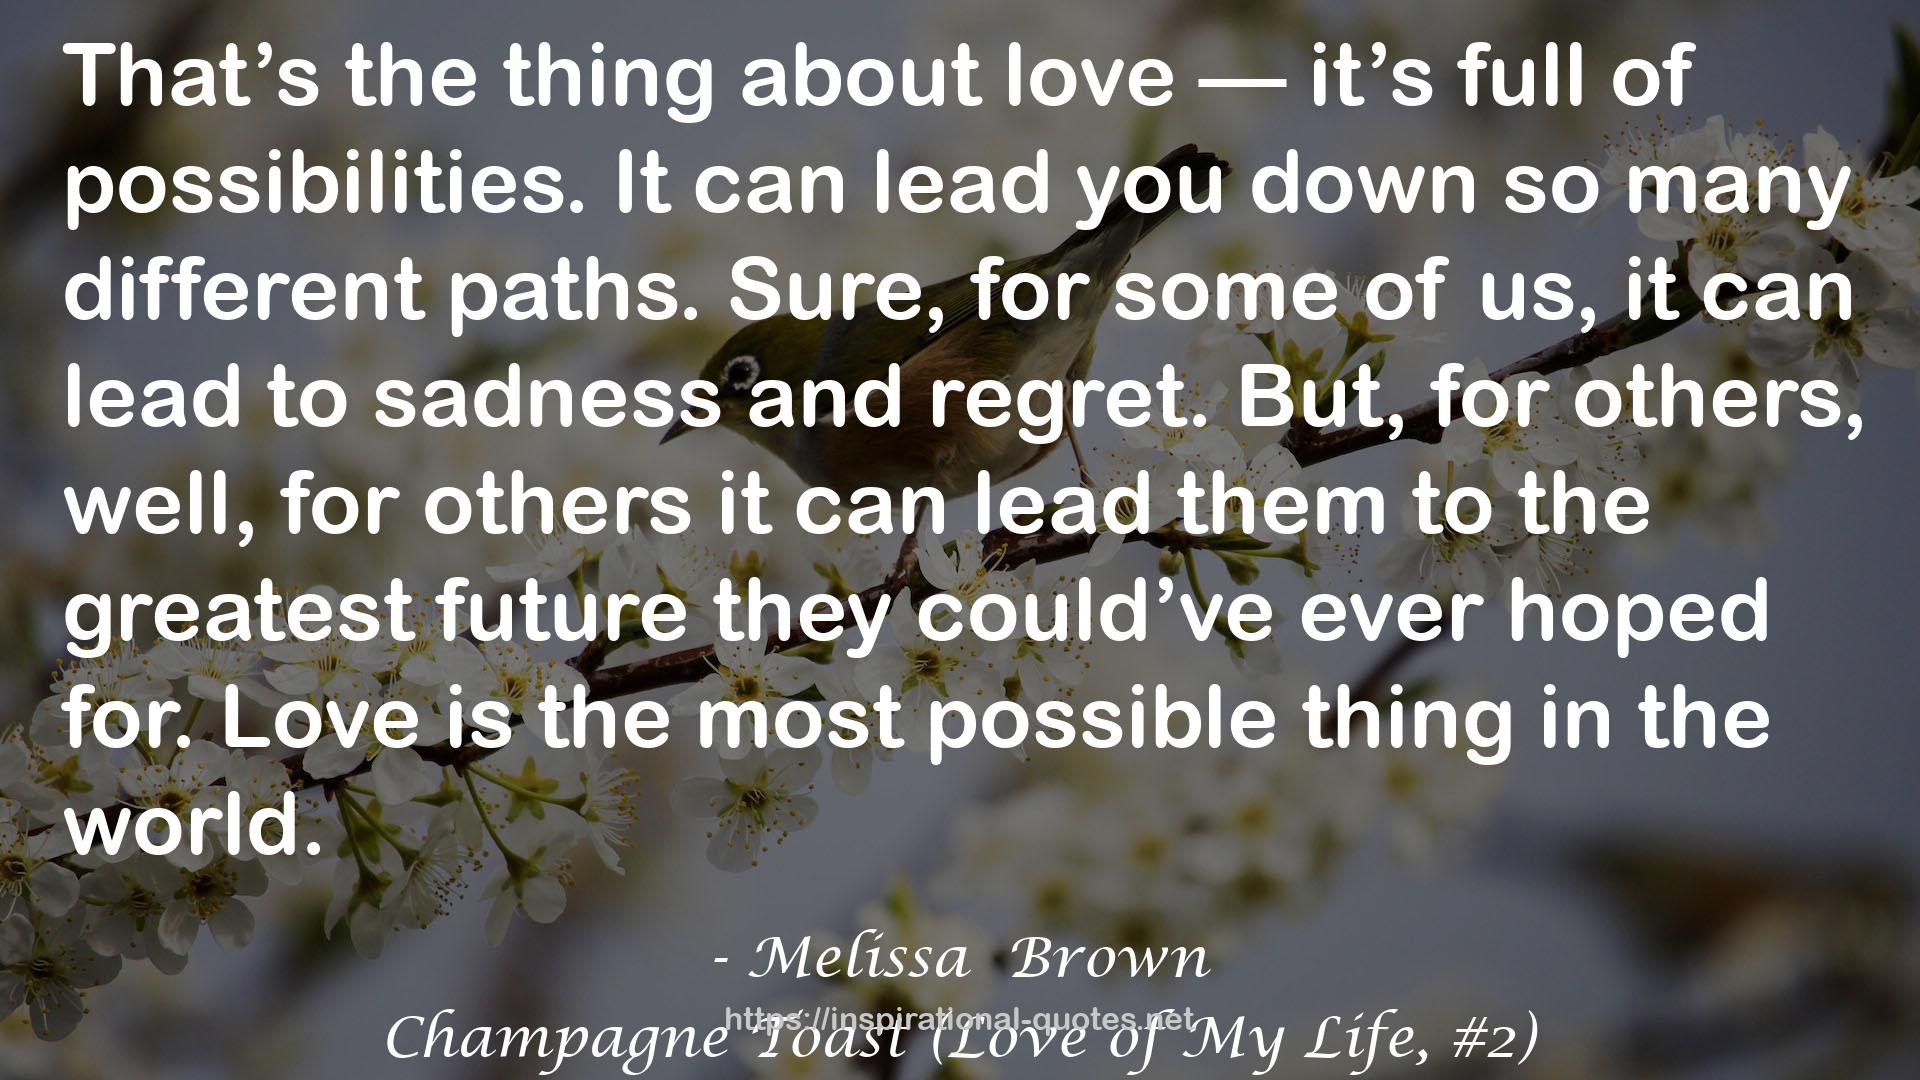 Champagne Toast (Love of My Life, #2) QUOTES